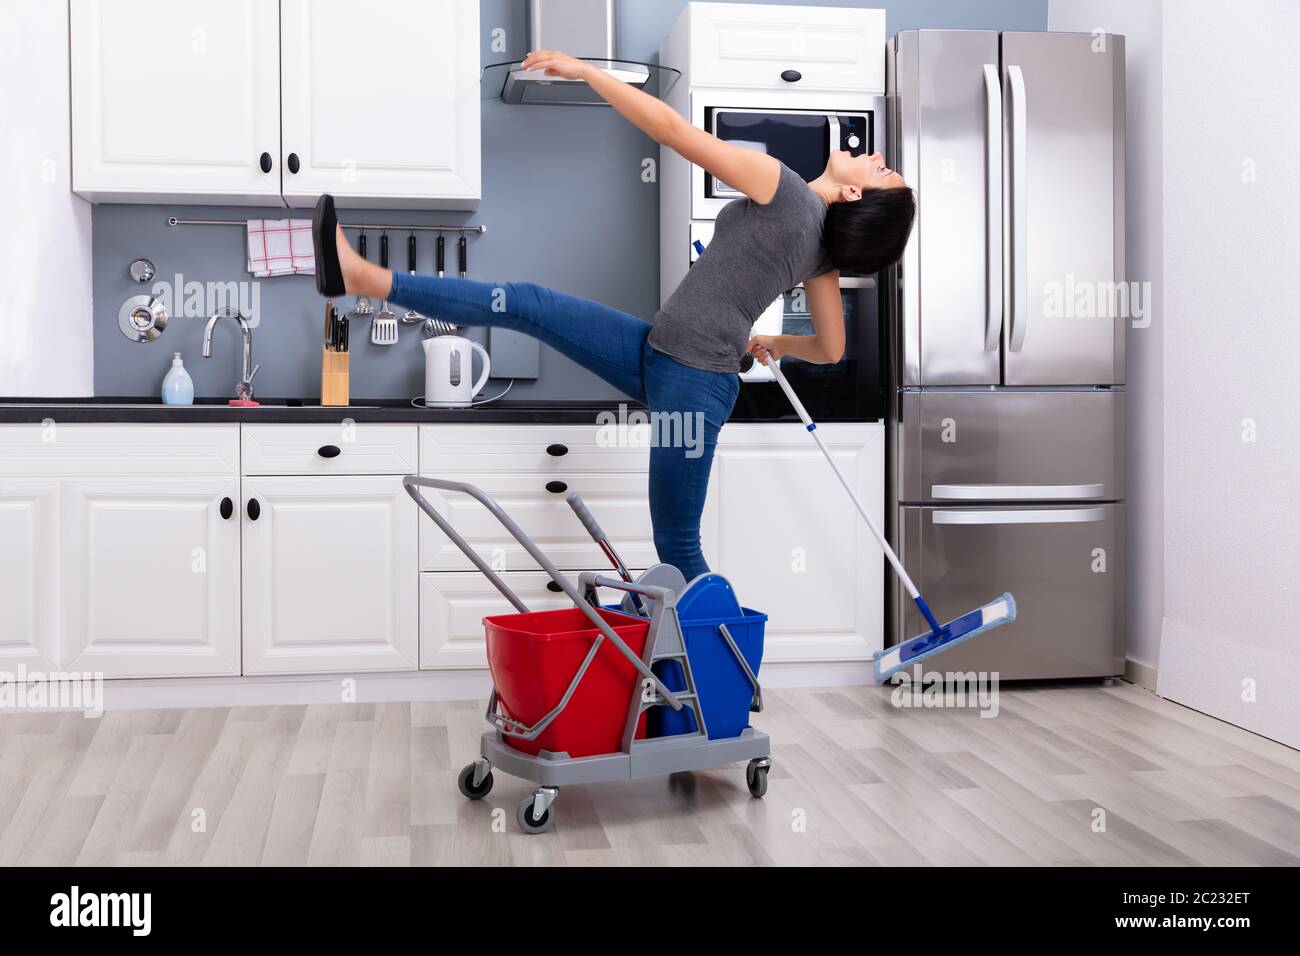 Close-up Of A Young Woman Slipping While Mopping Floor In The Kitchen Stock Photo